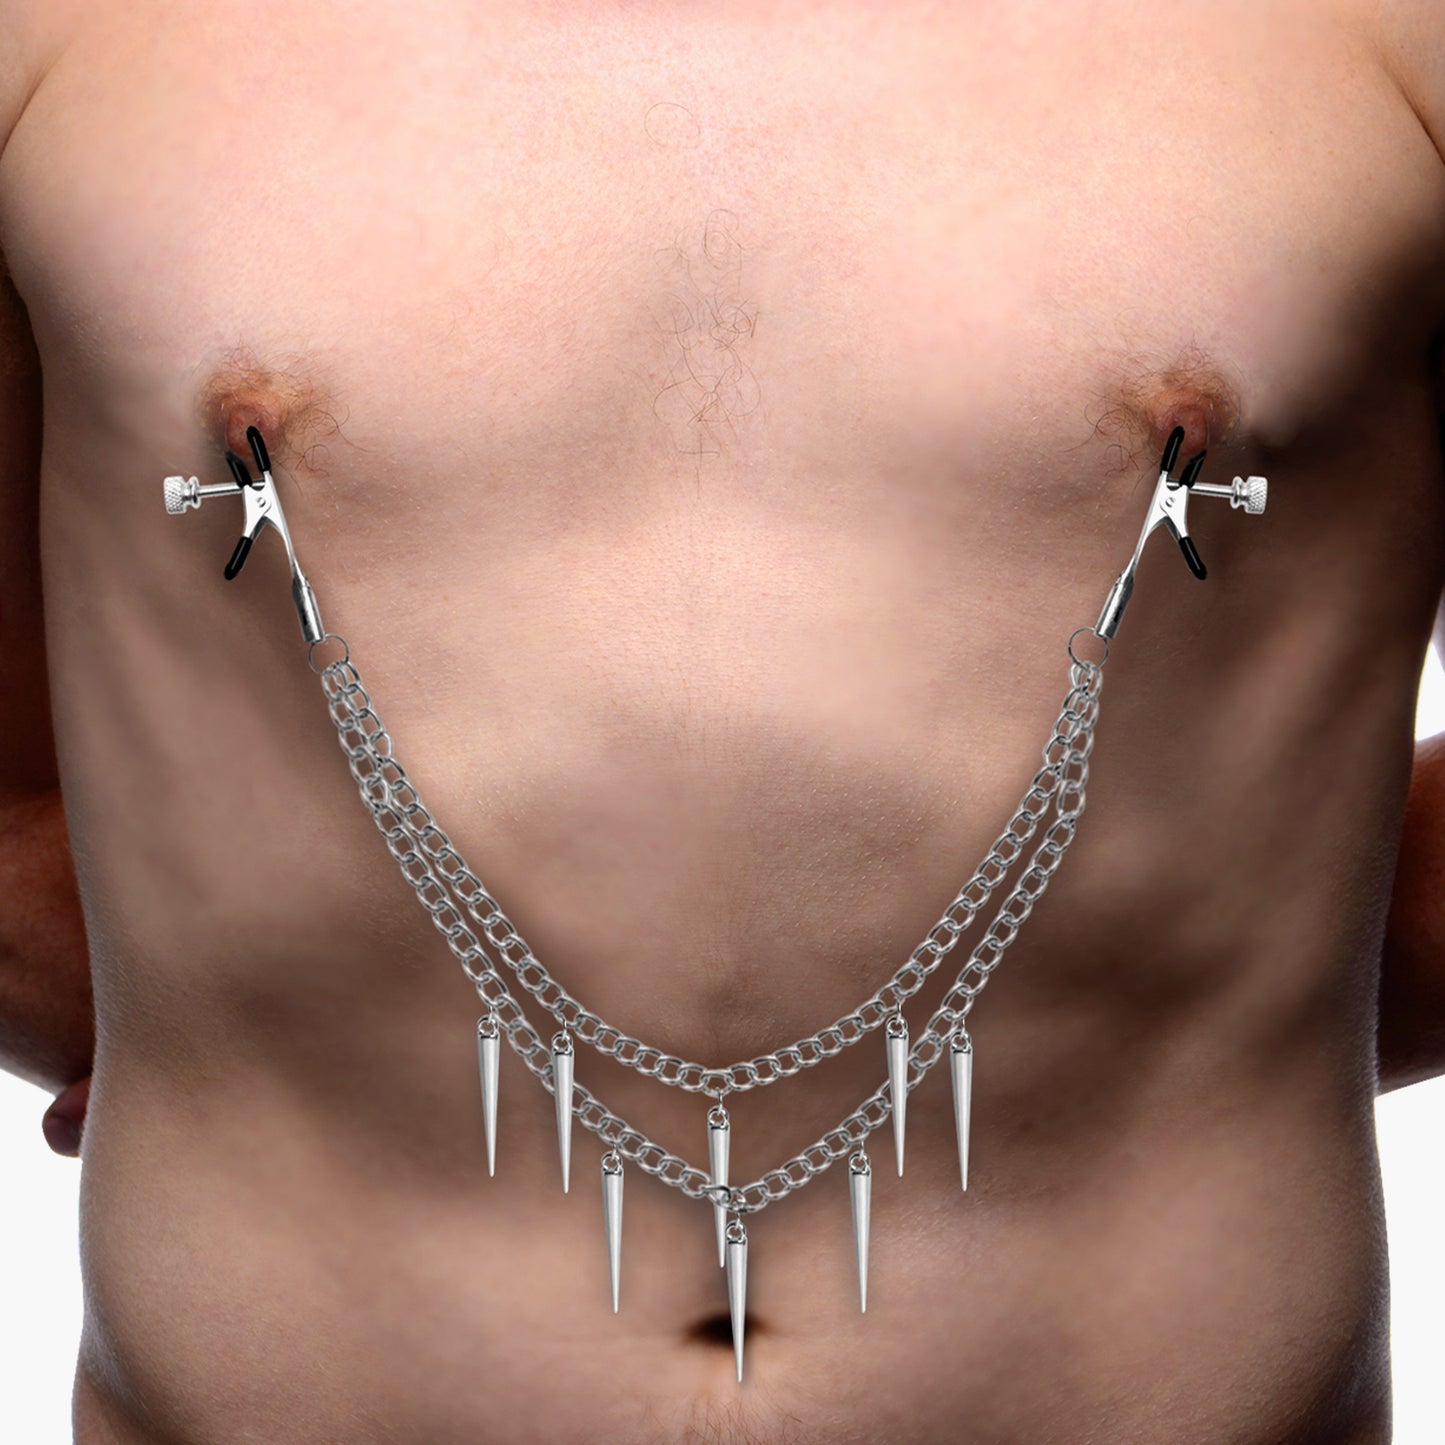 Daggers Double Chain Nipple Clamps